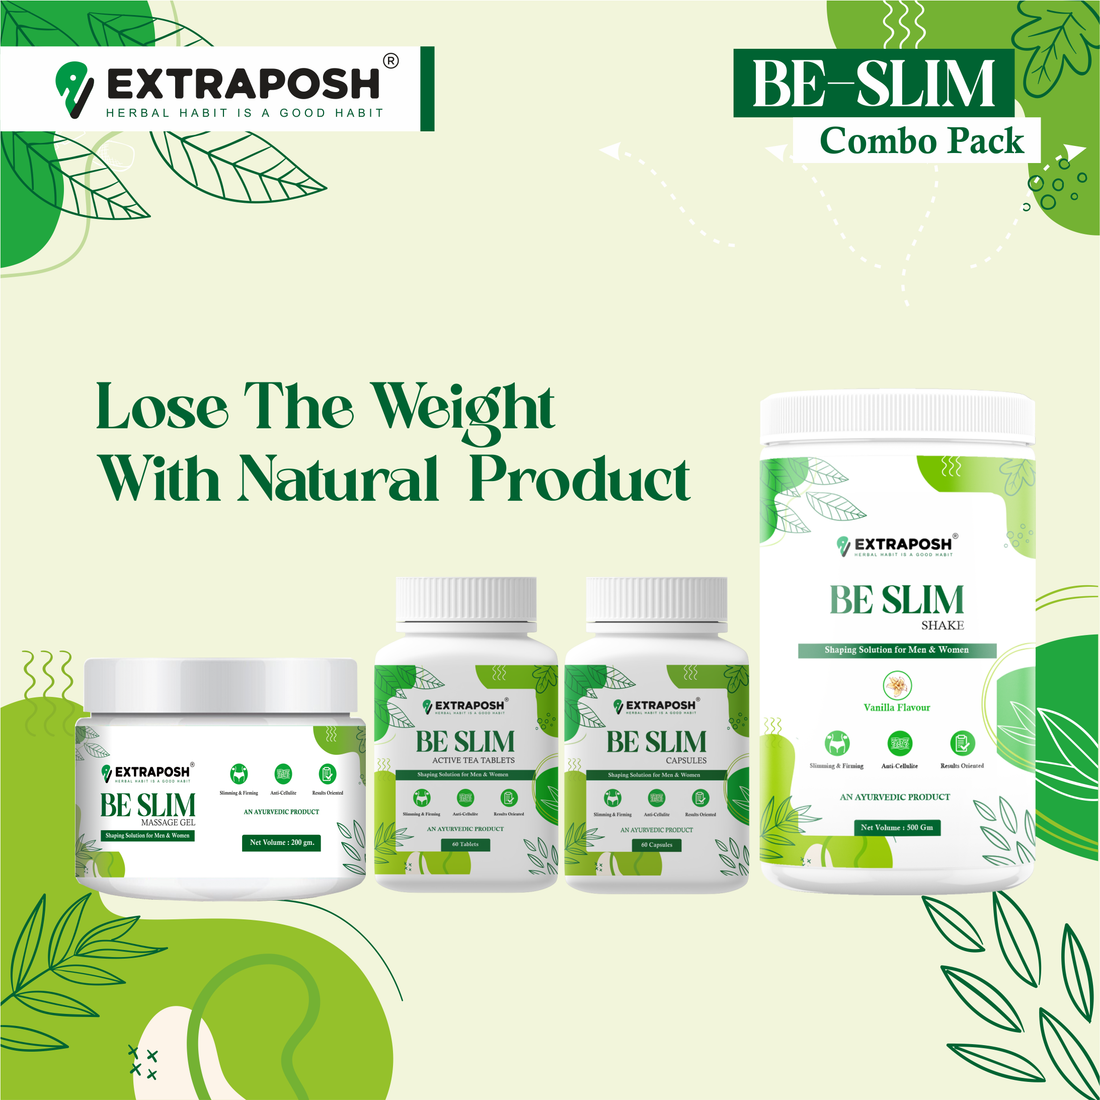 How Extraposh  be slimming kit for Weightloss Works ?